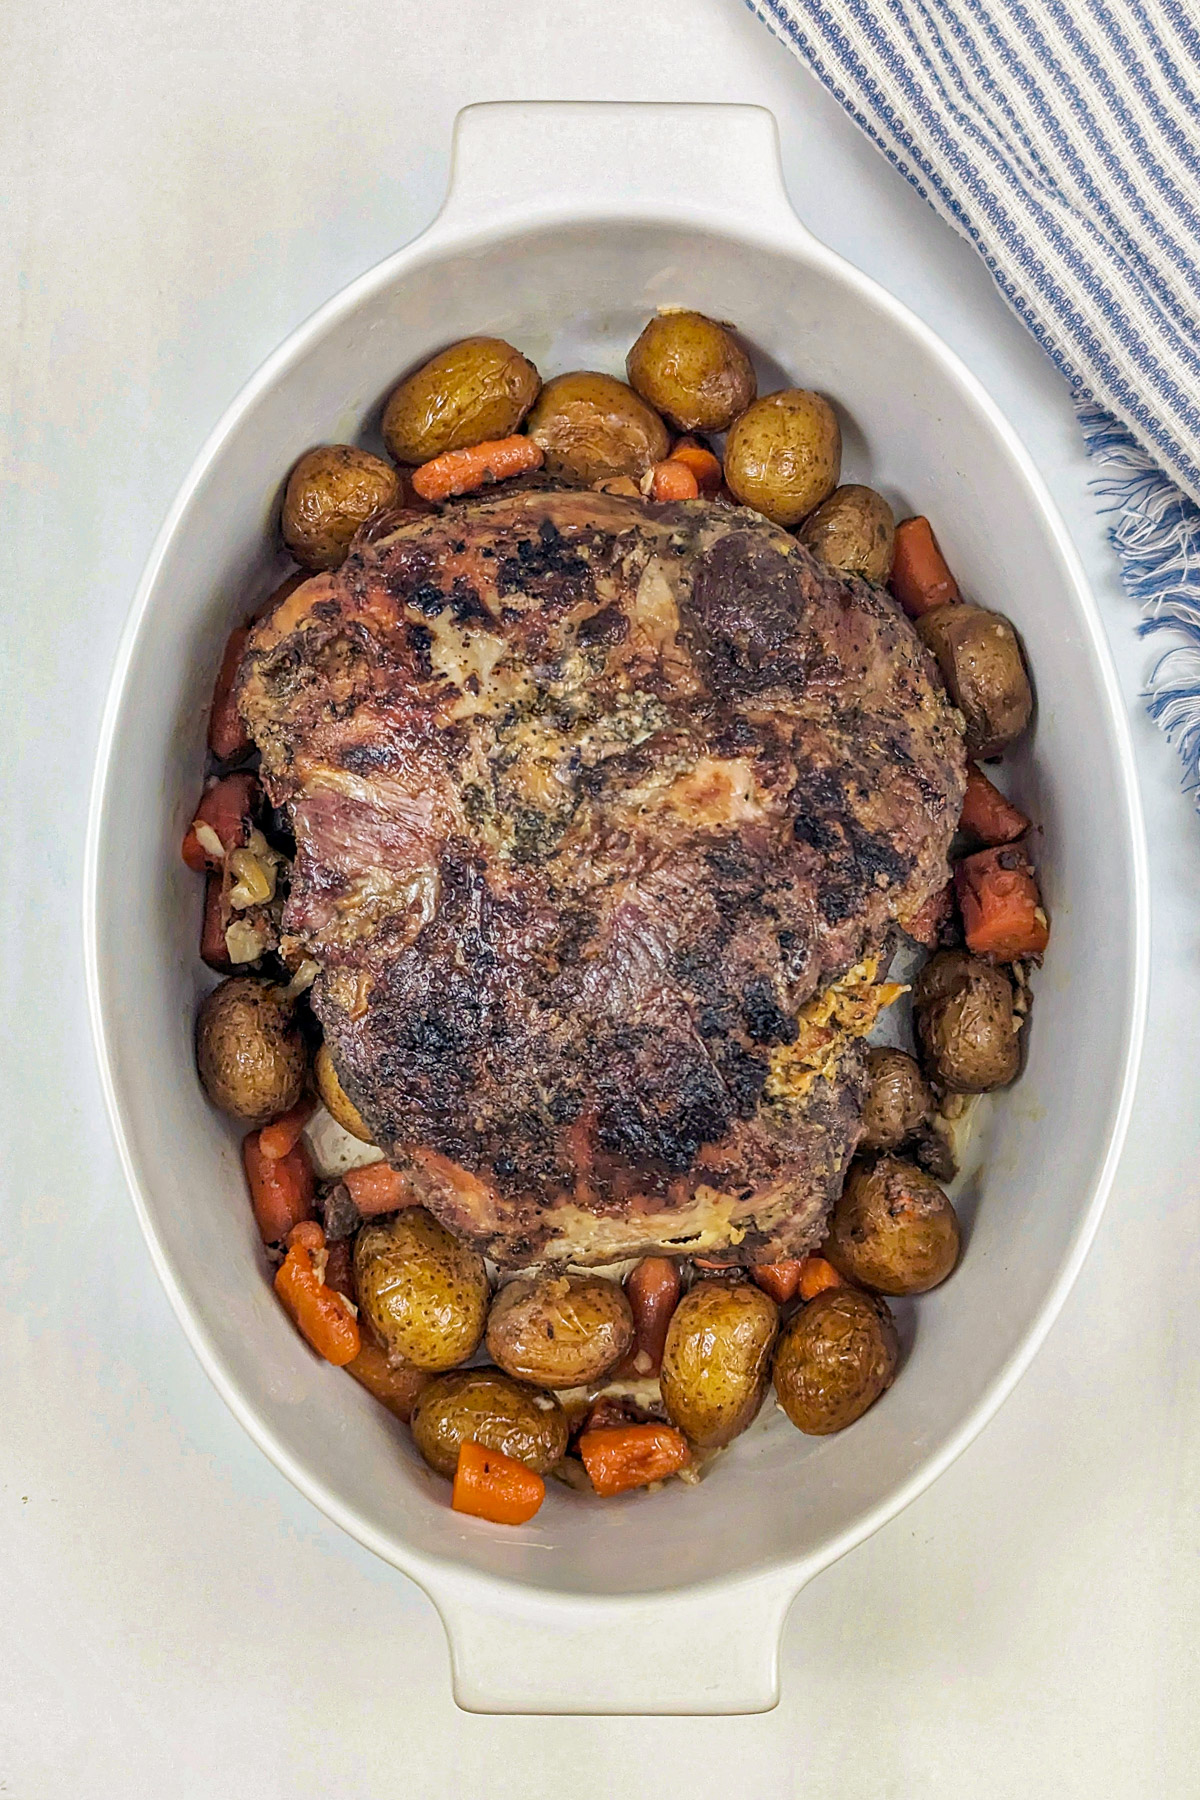 Boneless leg of lamb in a serving bowl with vegetables.